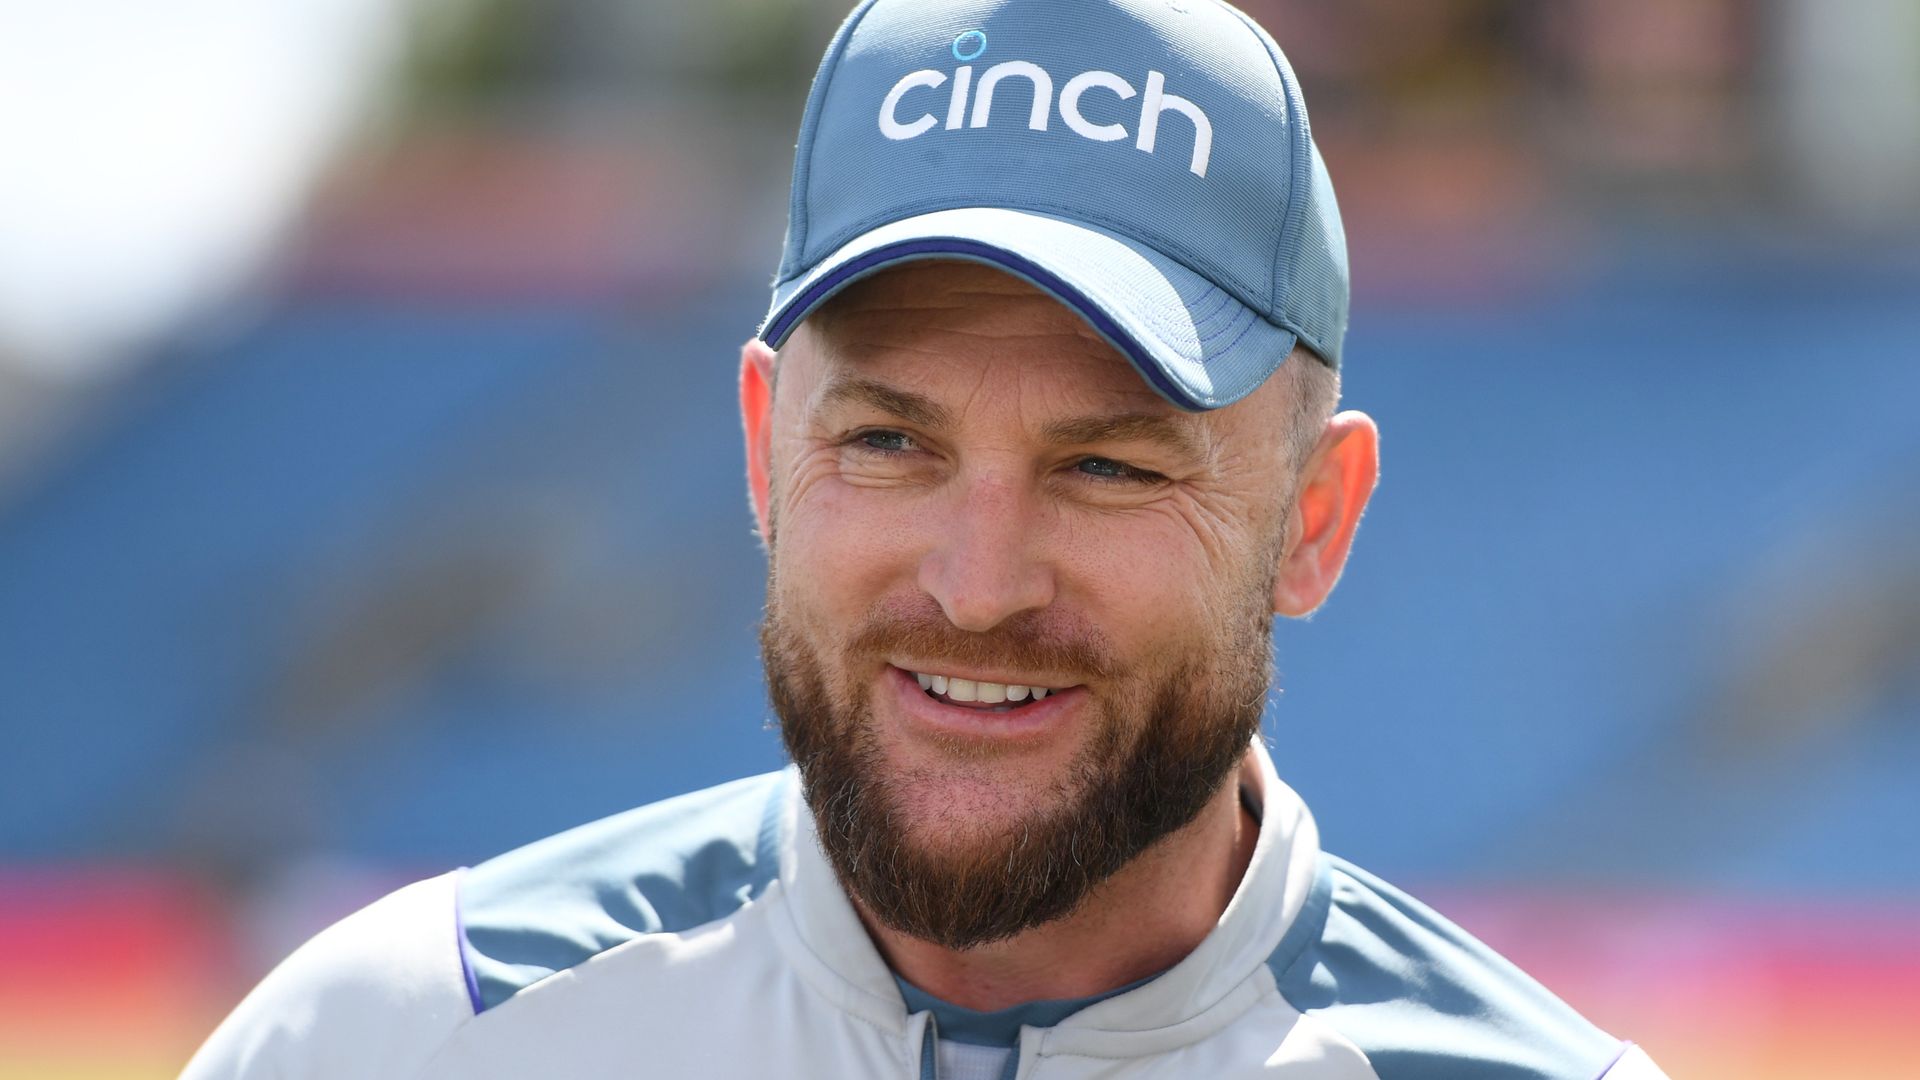 McCullum: An unbelievable few weeks | ‘Stokes beats me on aggression’SkySports | Information